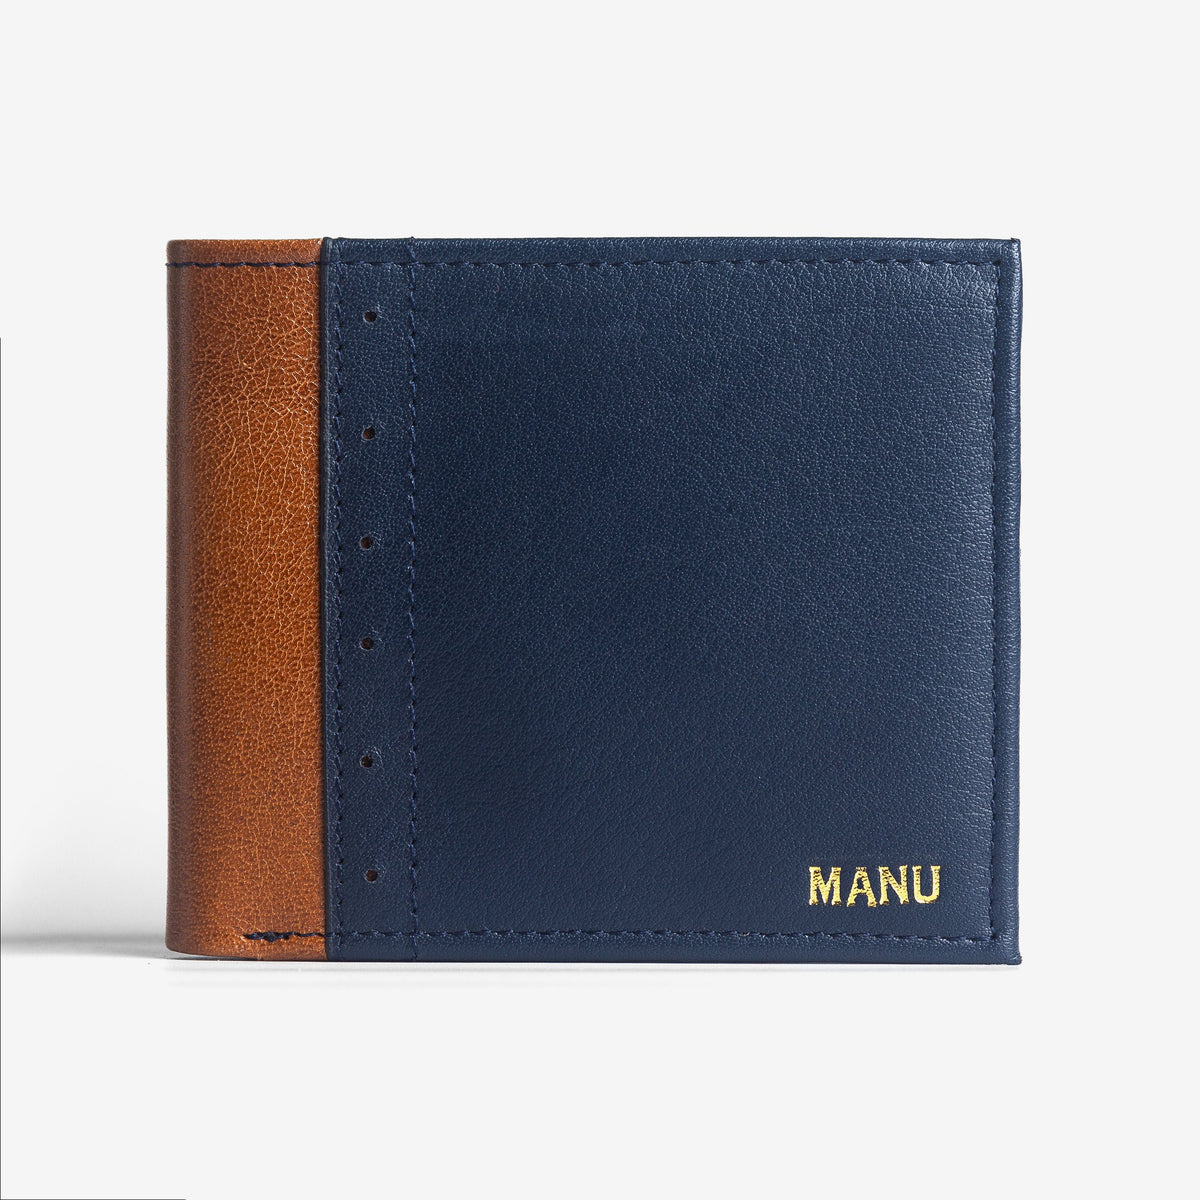 Customized Wallet for Men by The Messy Corner